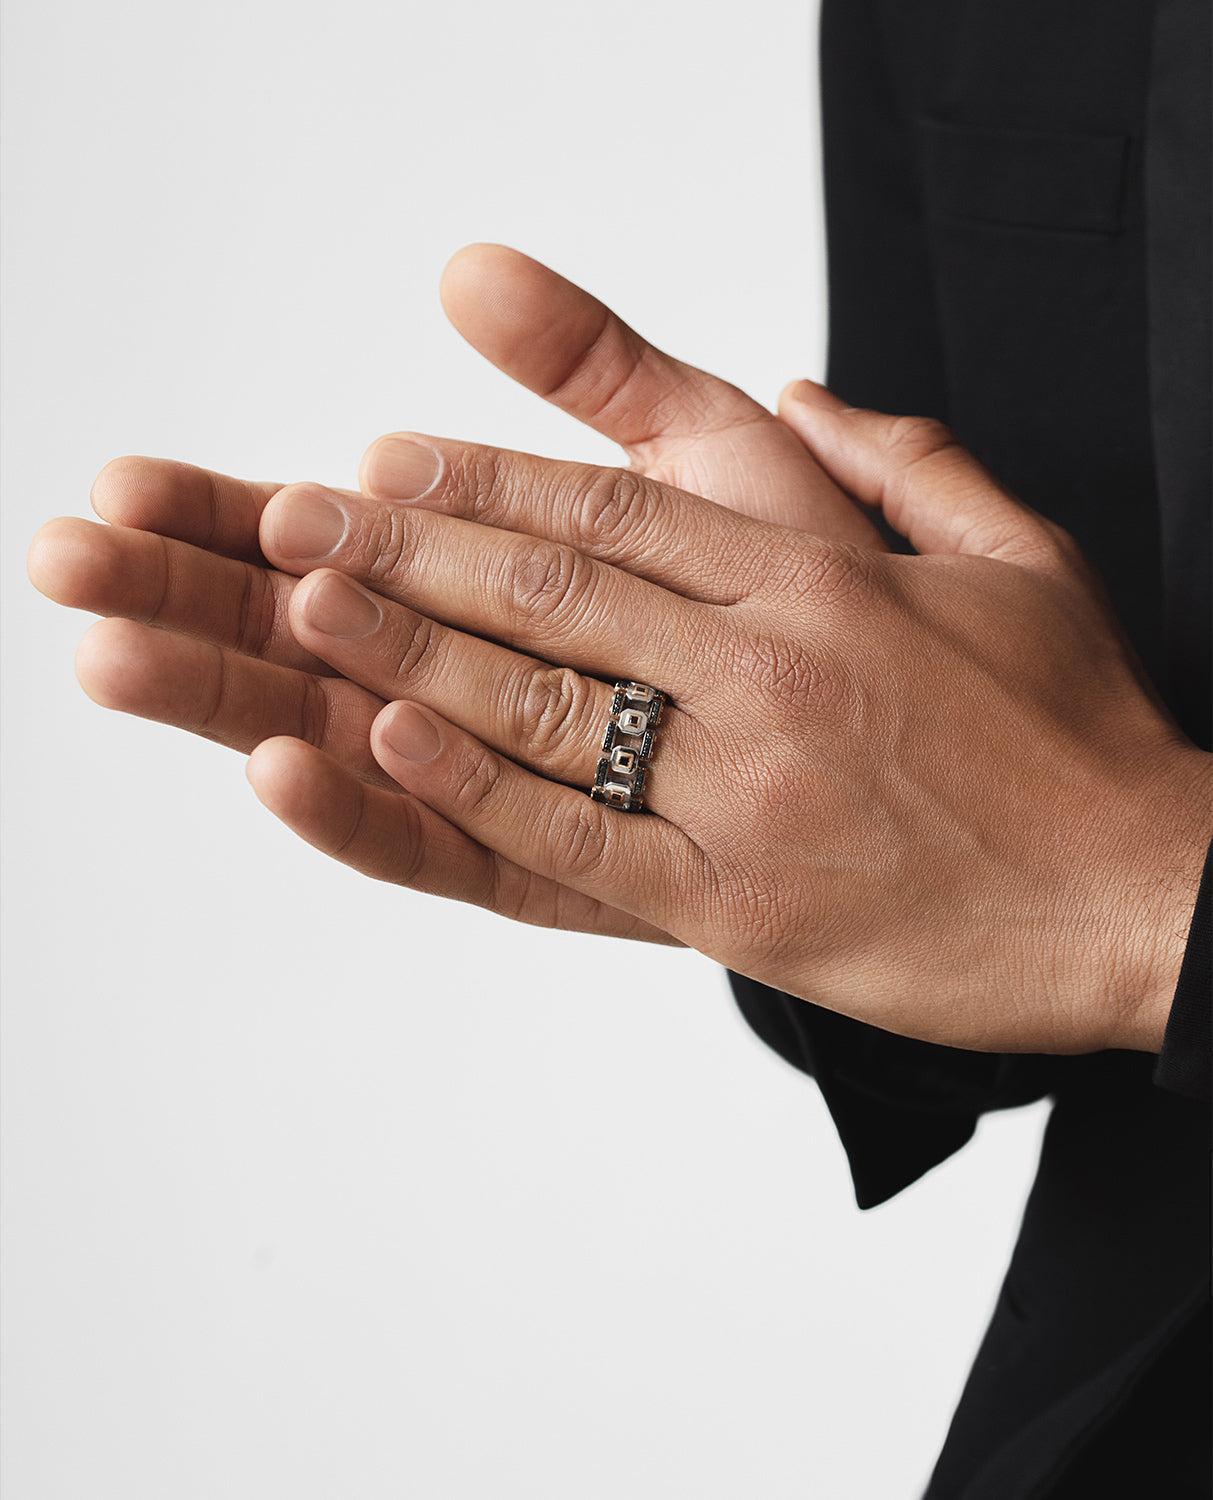 The design of this two-tone band bridges two different styles in its variations of 1.20ct black diamond pave setting and metals: contemporary classic and cutting-edge modern. The La Paz, often enjoyed as an exceptional statement piece, can even be